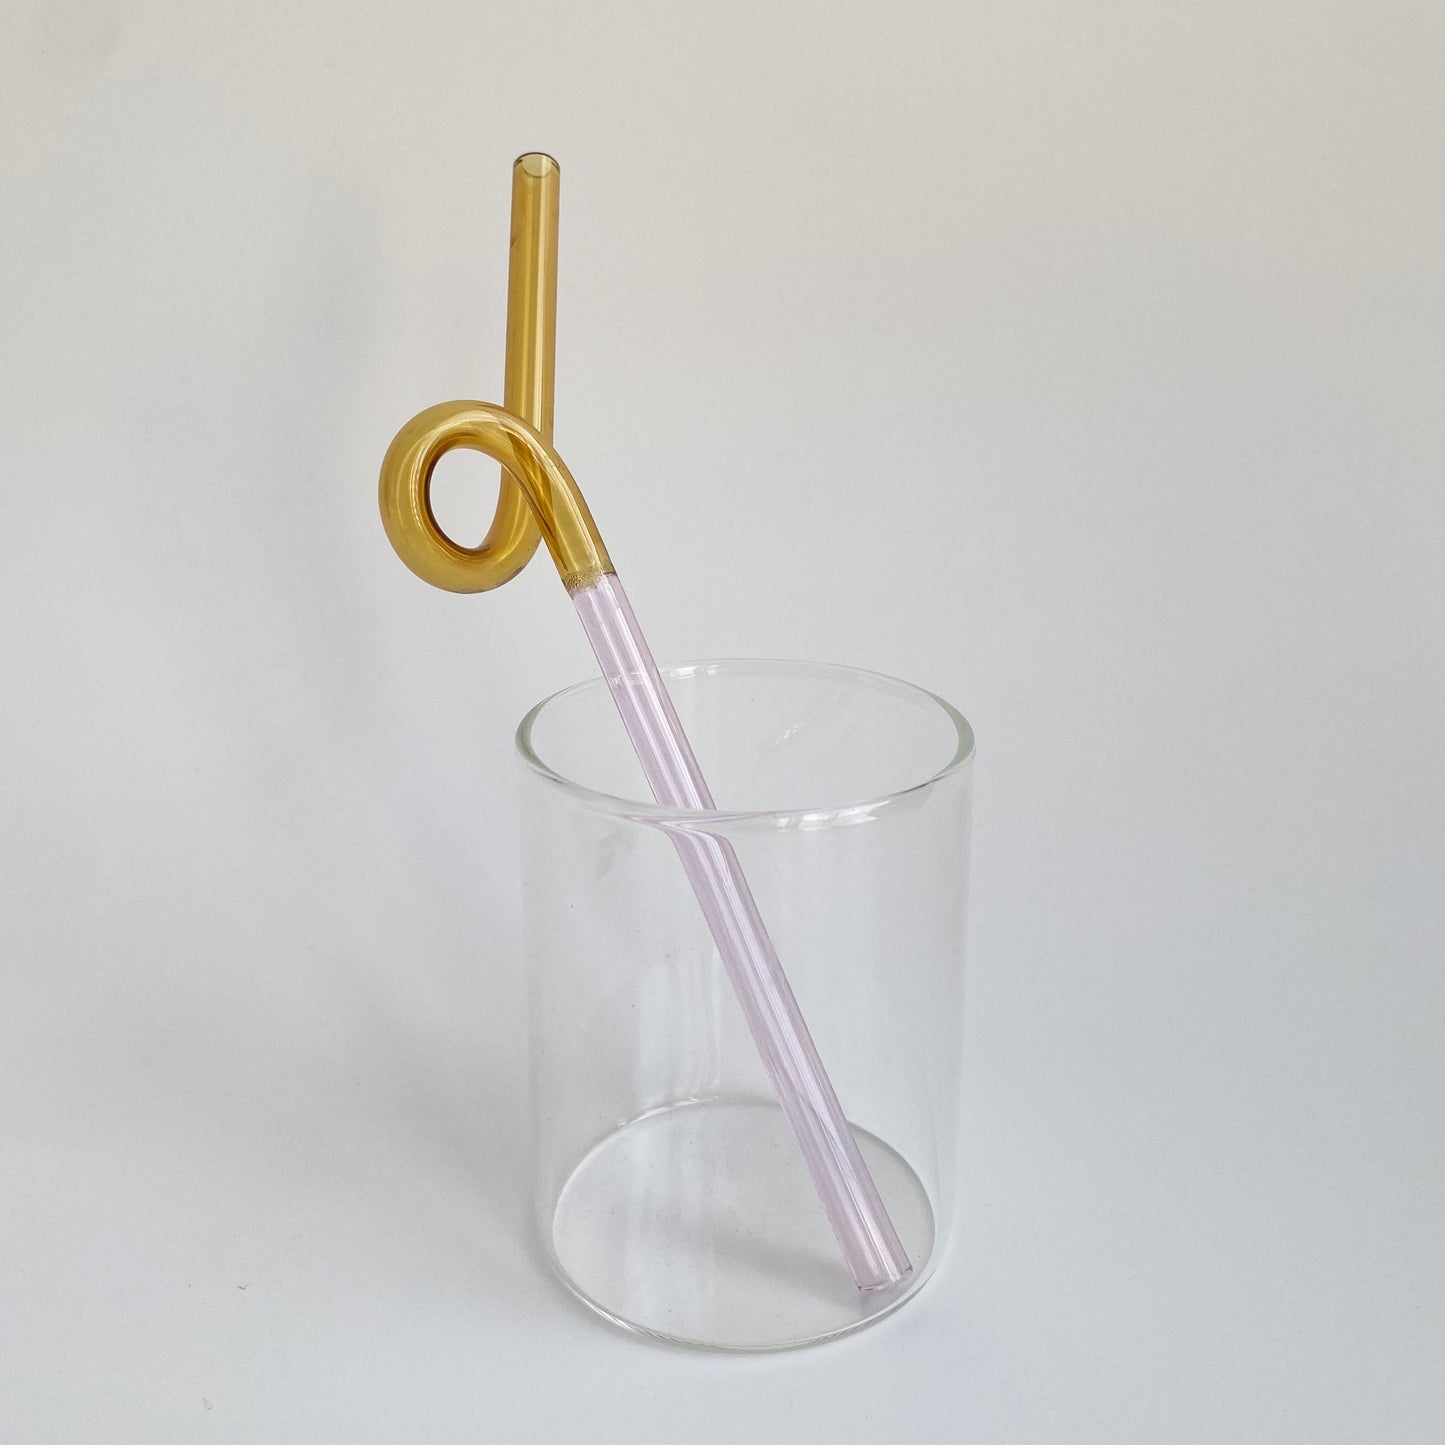 Colorful Spiral & Wavy Glass Straw in pink/yellow